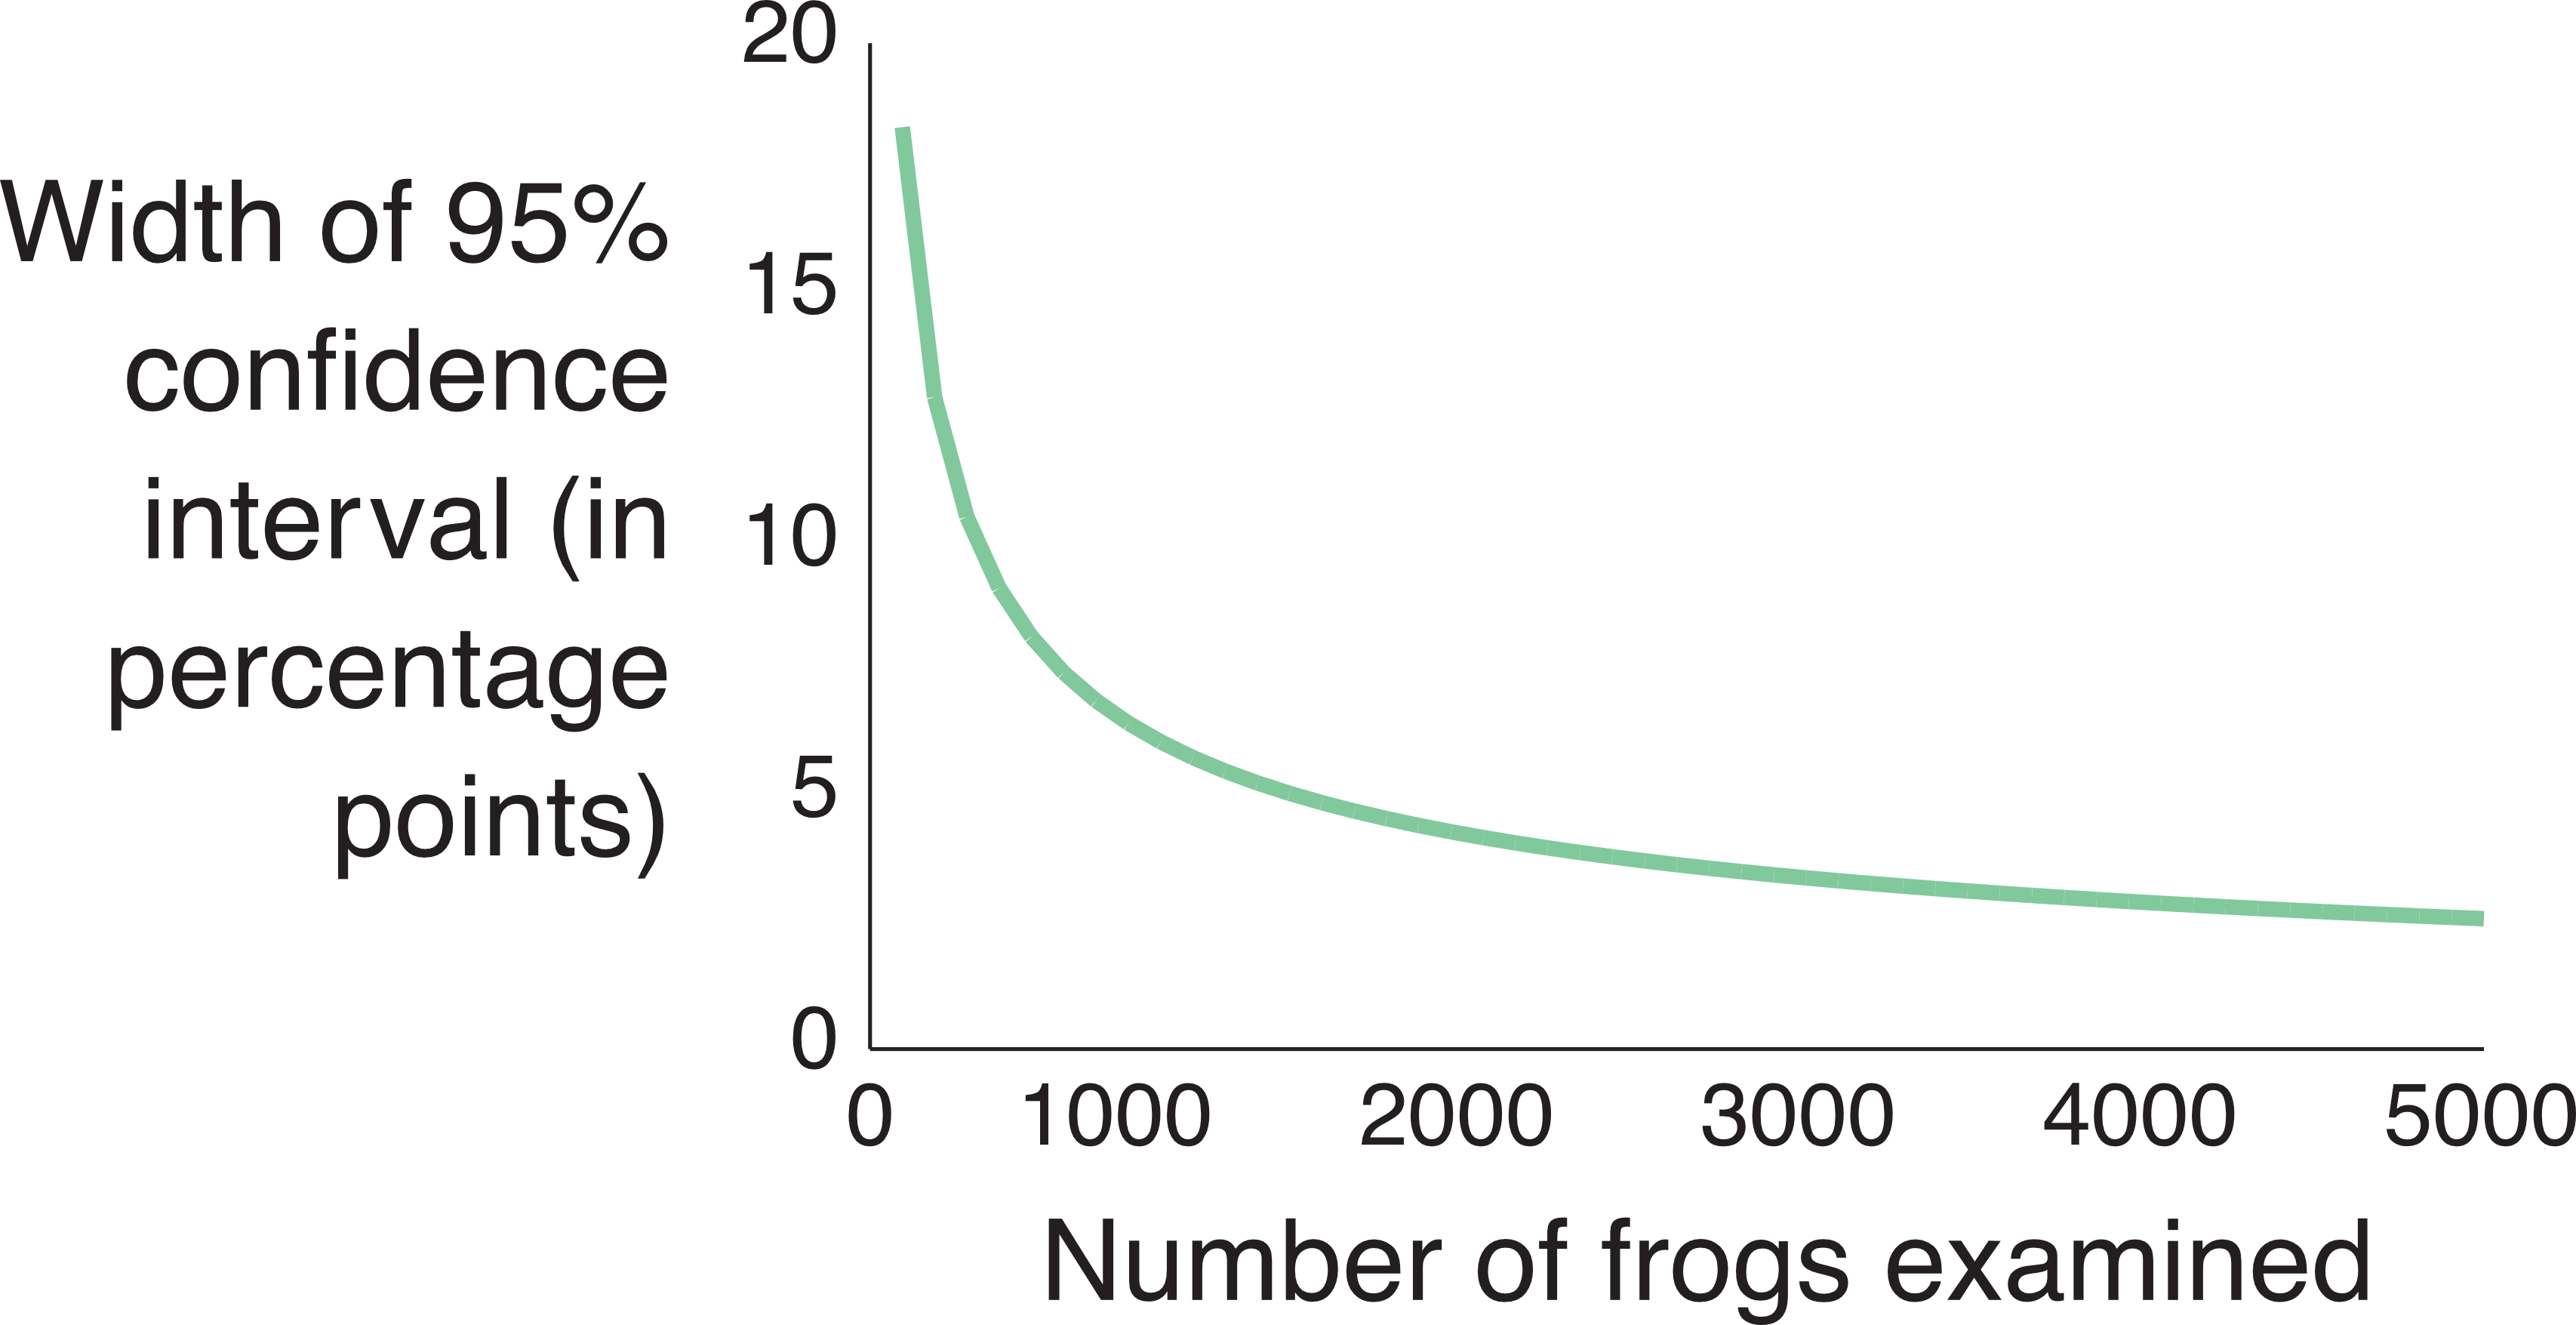 Line chart. Vertical axis is Width of 95% confidence interval in percentage points, ranging from 0 to 20. Horizontal axis is Number of frogs examined, ranging from 0 to 5000. A line on the graph starts at (100, 18.3) and ends at (5000, 2.6).